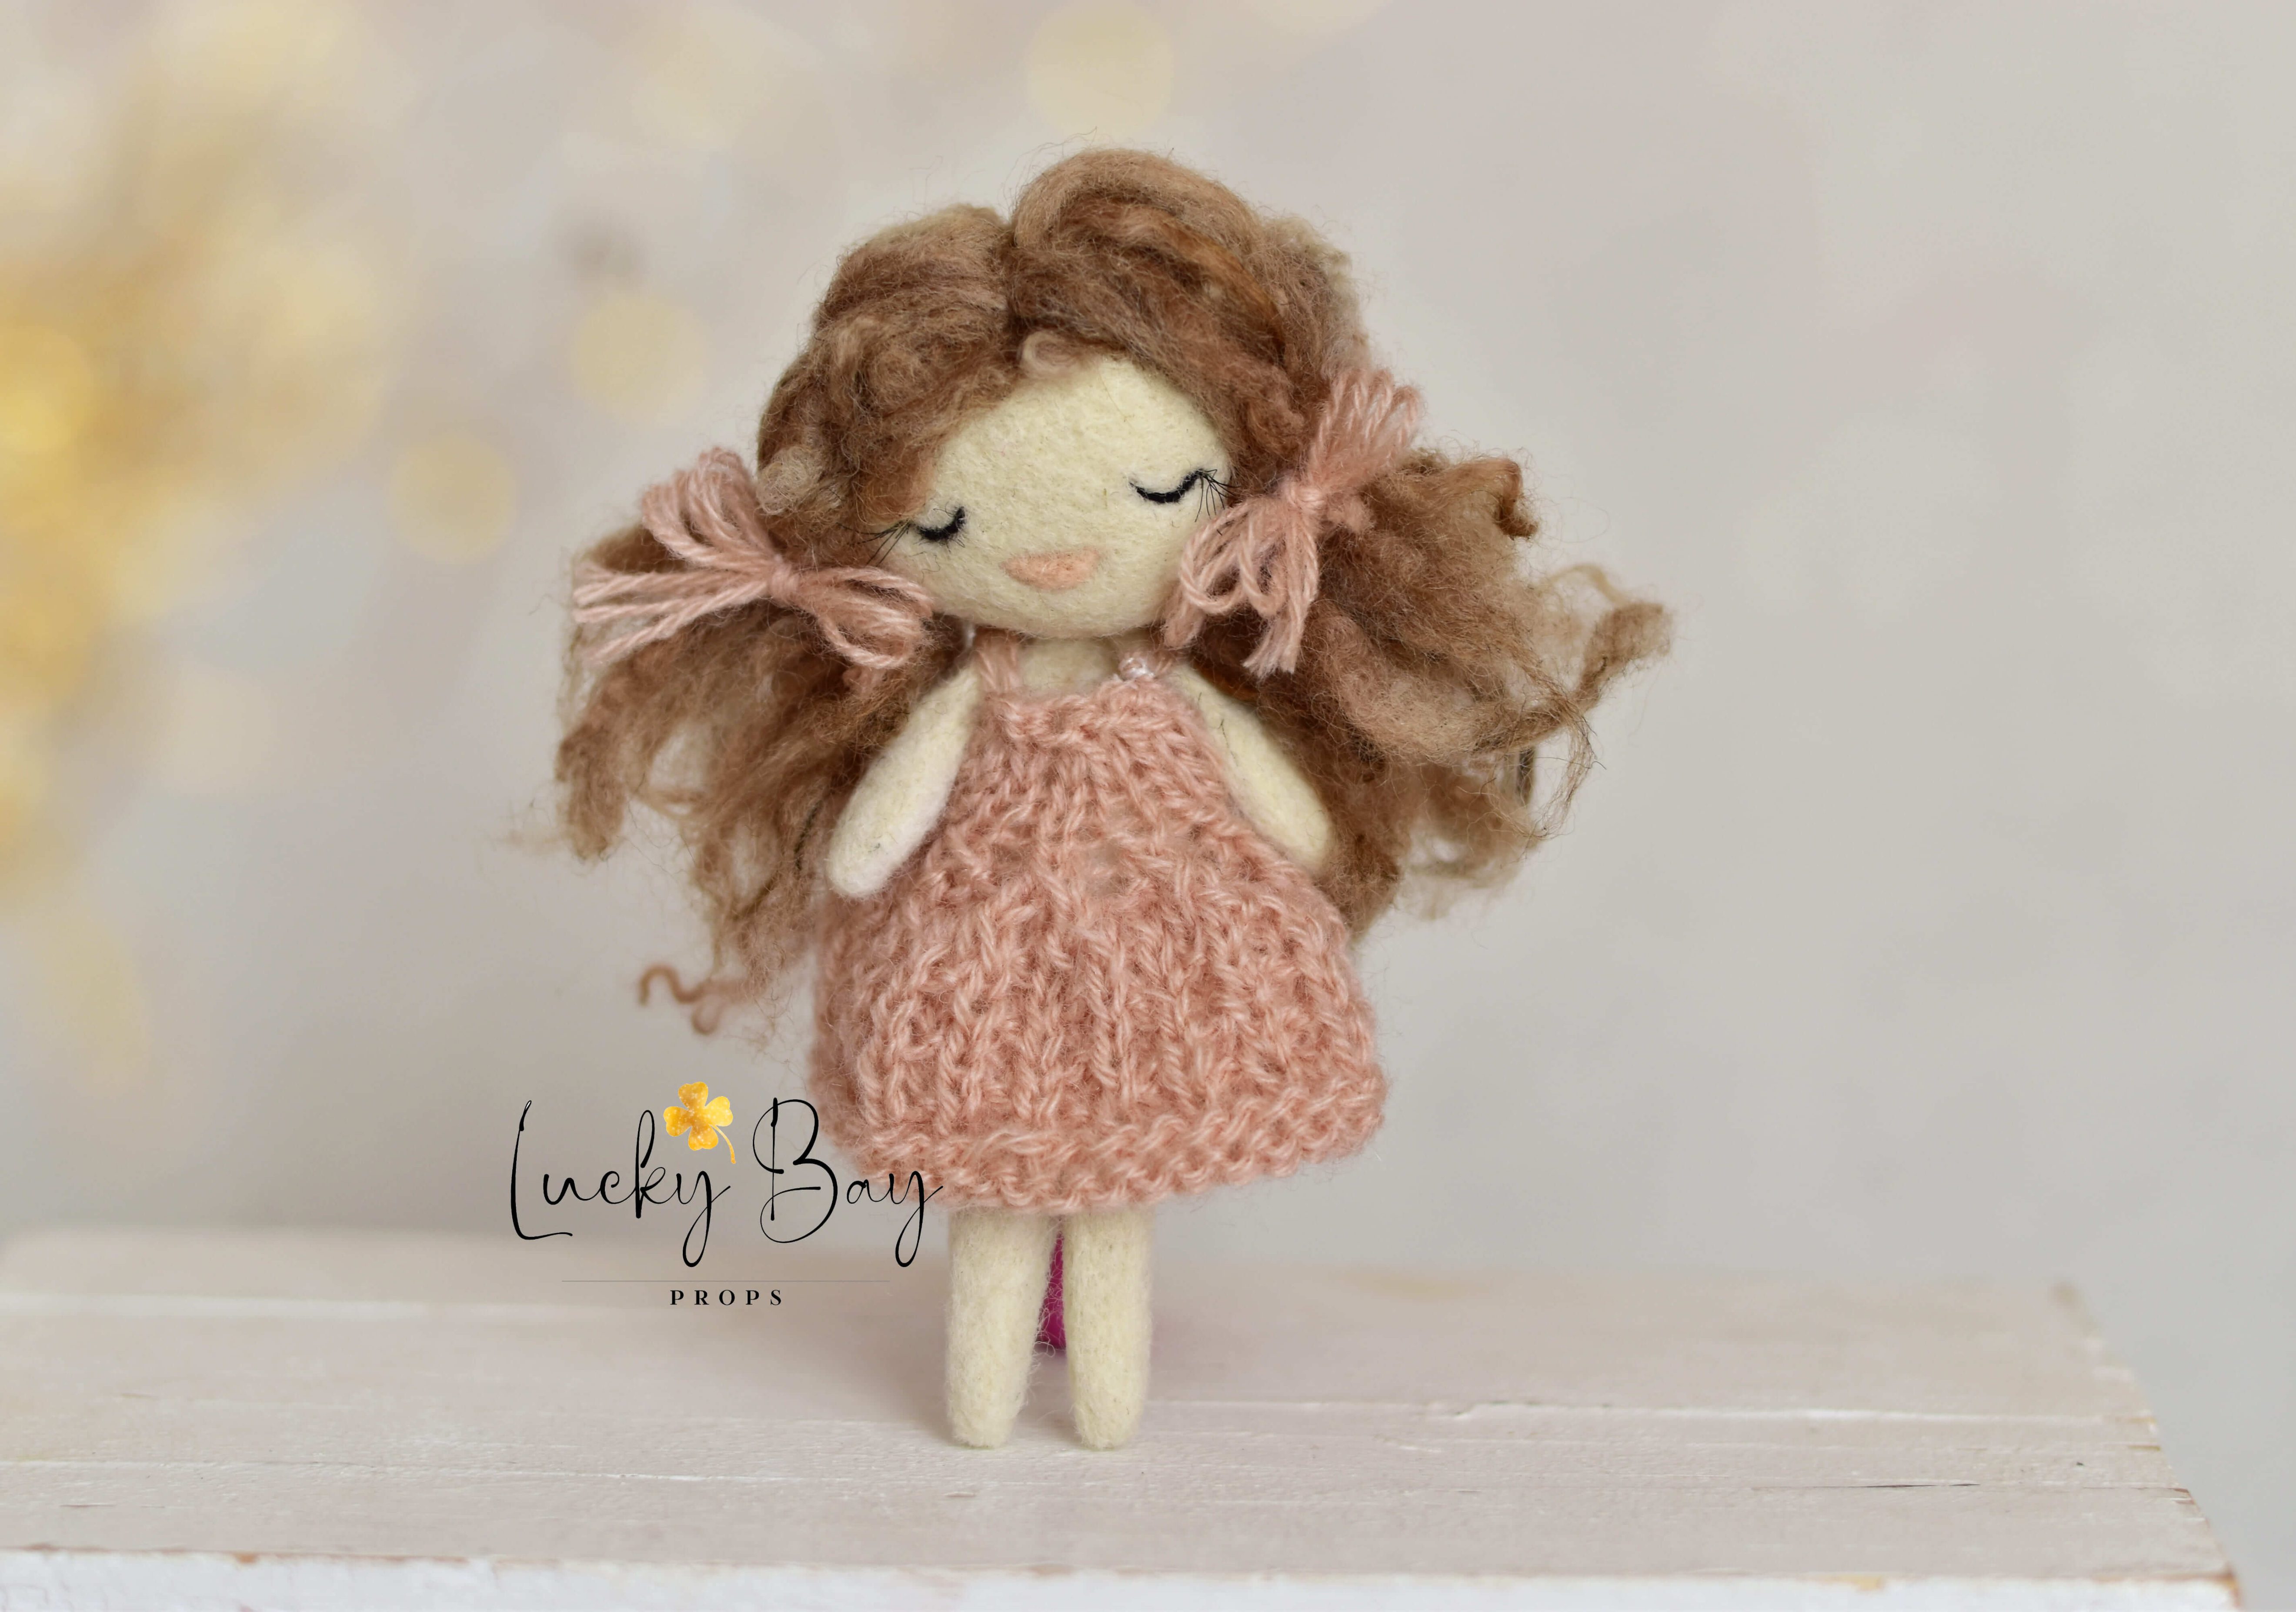 Felted doll in light pink dress | Felted photo props newborn | NEW